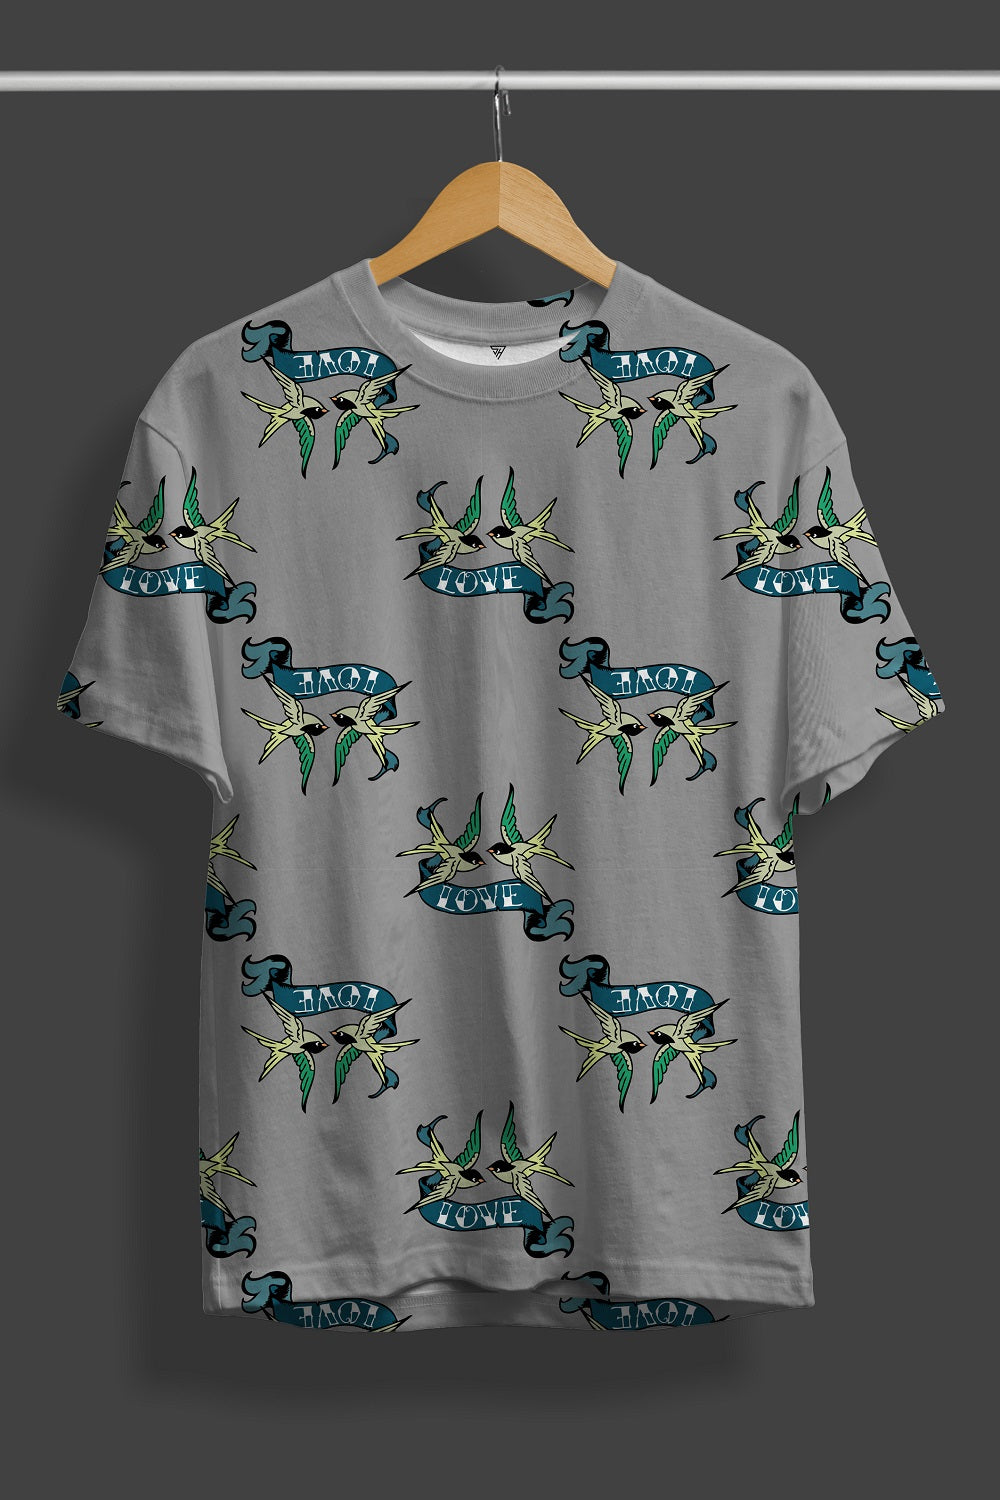 All Over Birds printed T-Shirt